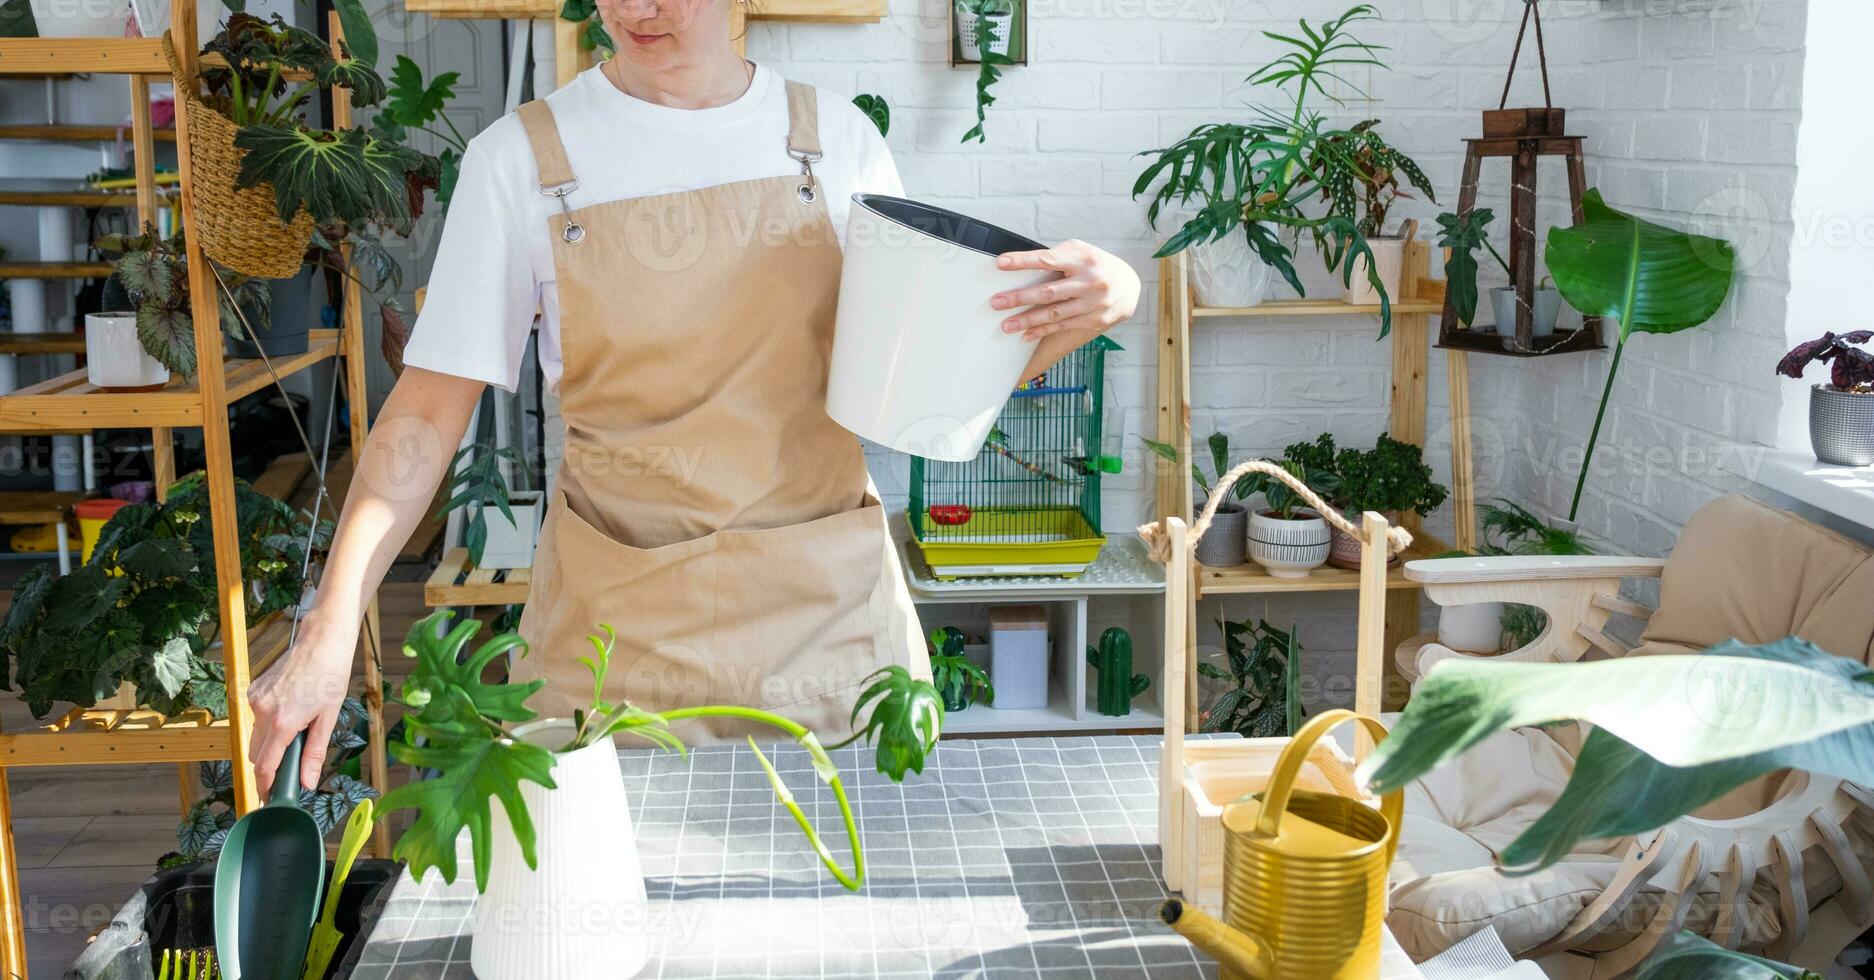 https://static.vecteezy.com/system/resources/previews/025/108/912/non_2x/woman-in-an-apron-holds-a-pot-with-a-double-bottom-and-automatic-watering-for-planting-rooted-cuttings-of-the-house-plant-philodendron-mayo-planting-and-care-green-house-mock-up-drainage-liner-photo.jpg